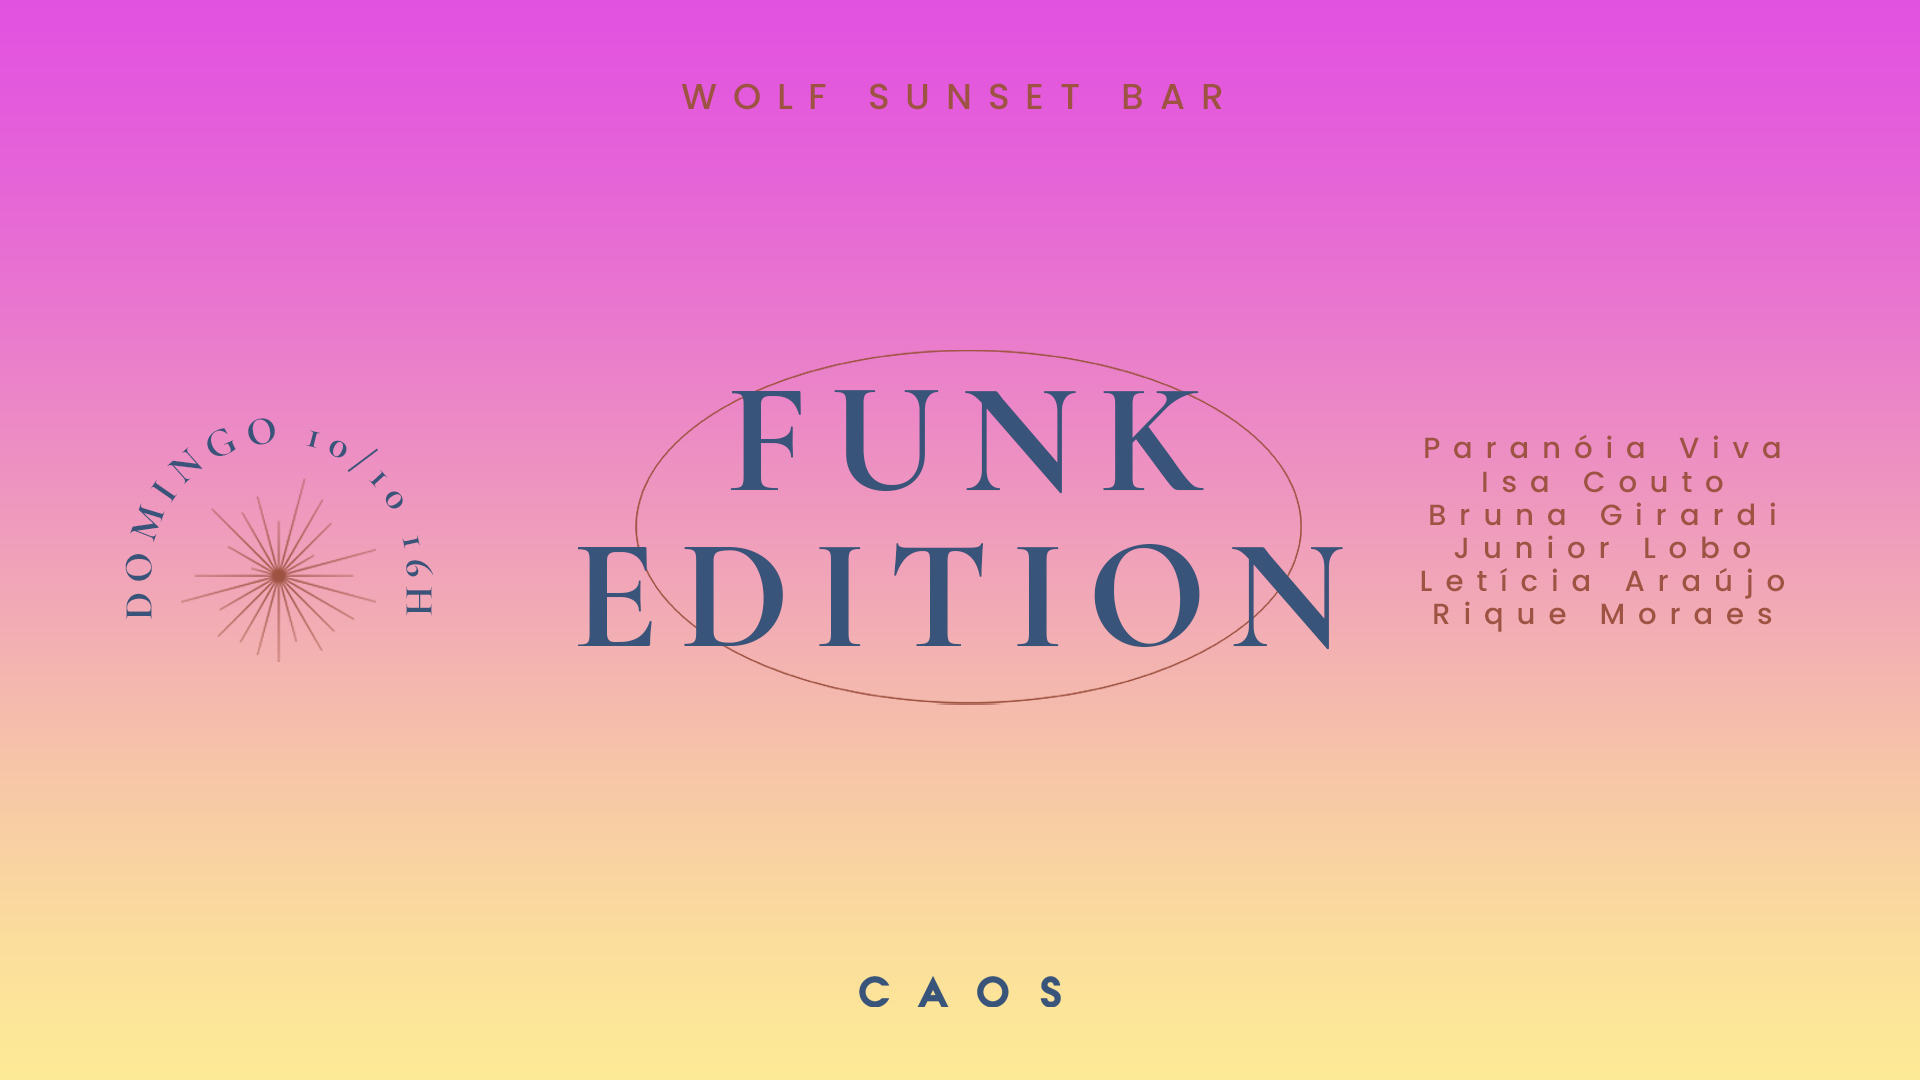 🎫 Wolf Sunset Bar Funk Edition no Caos